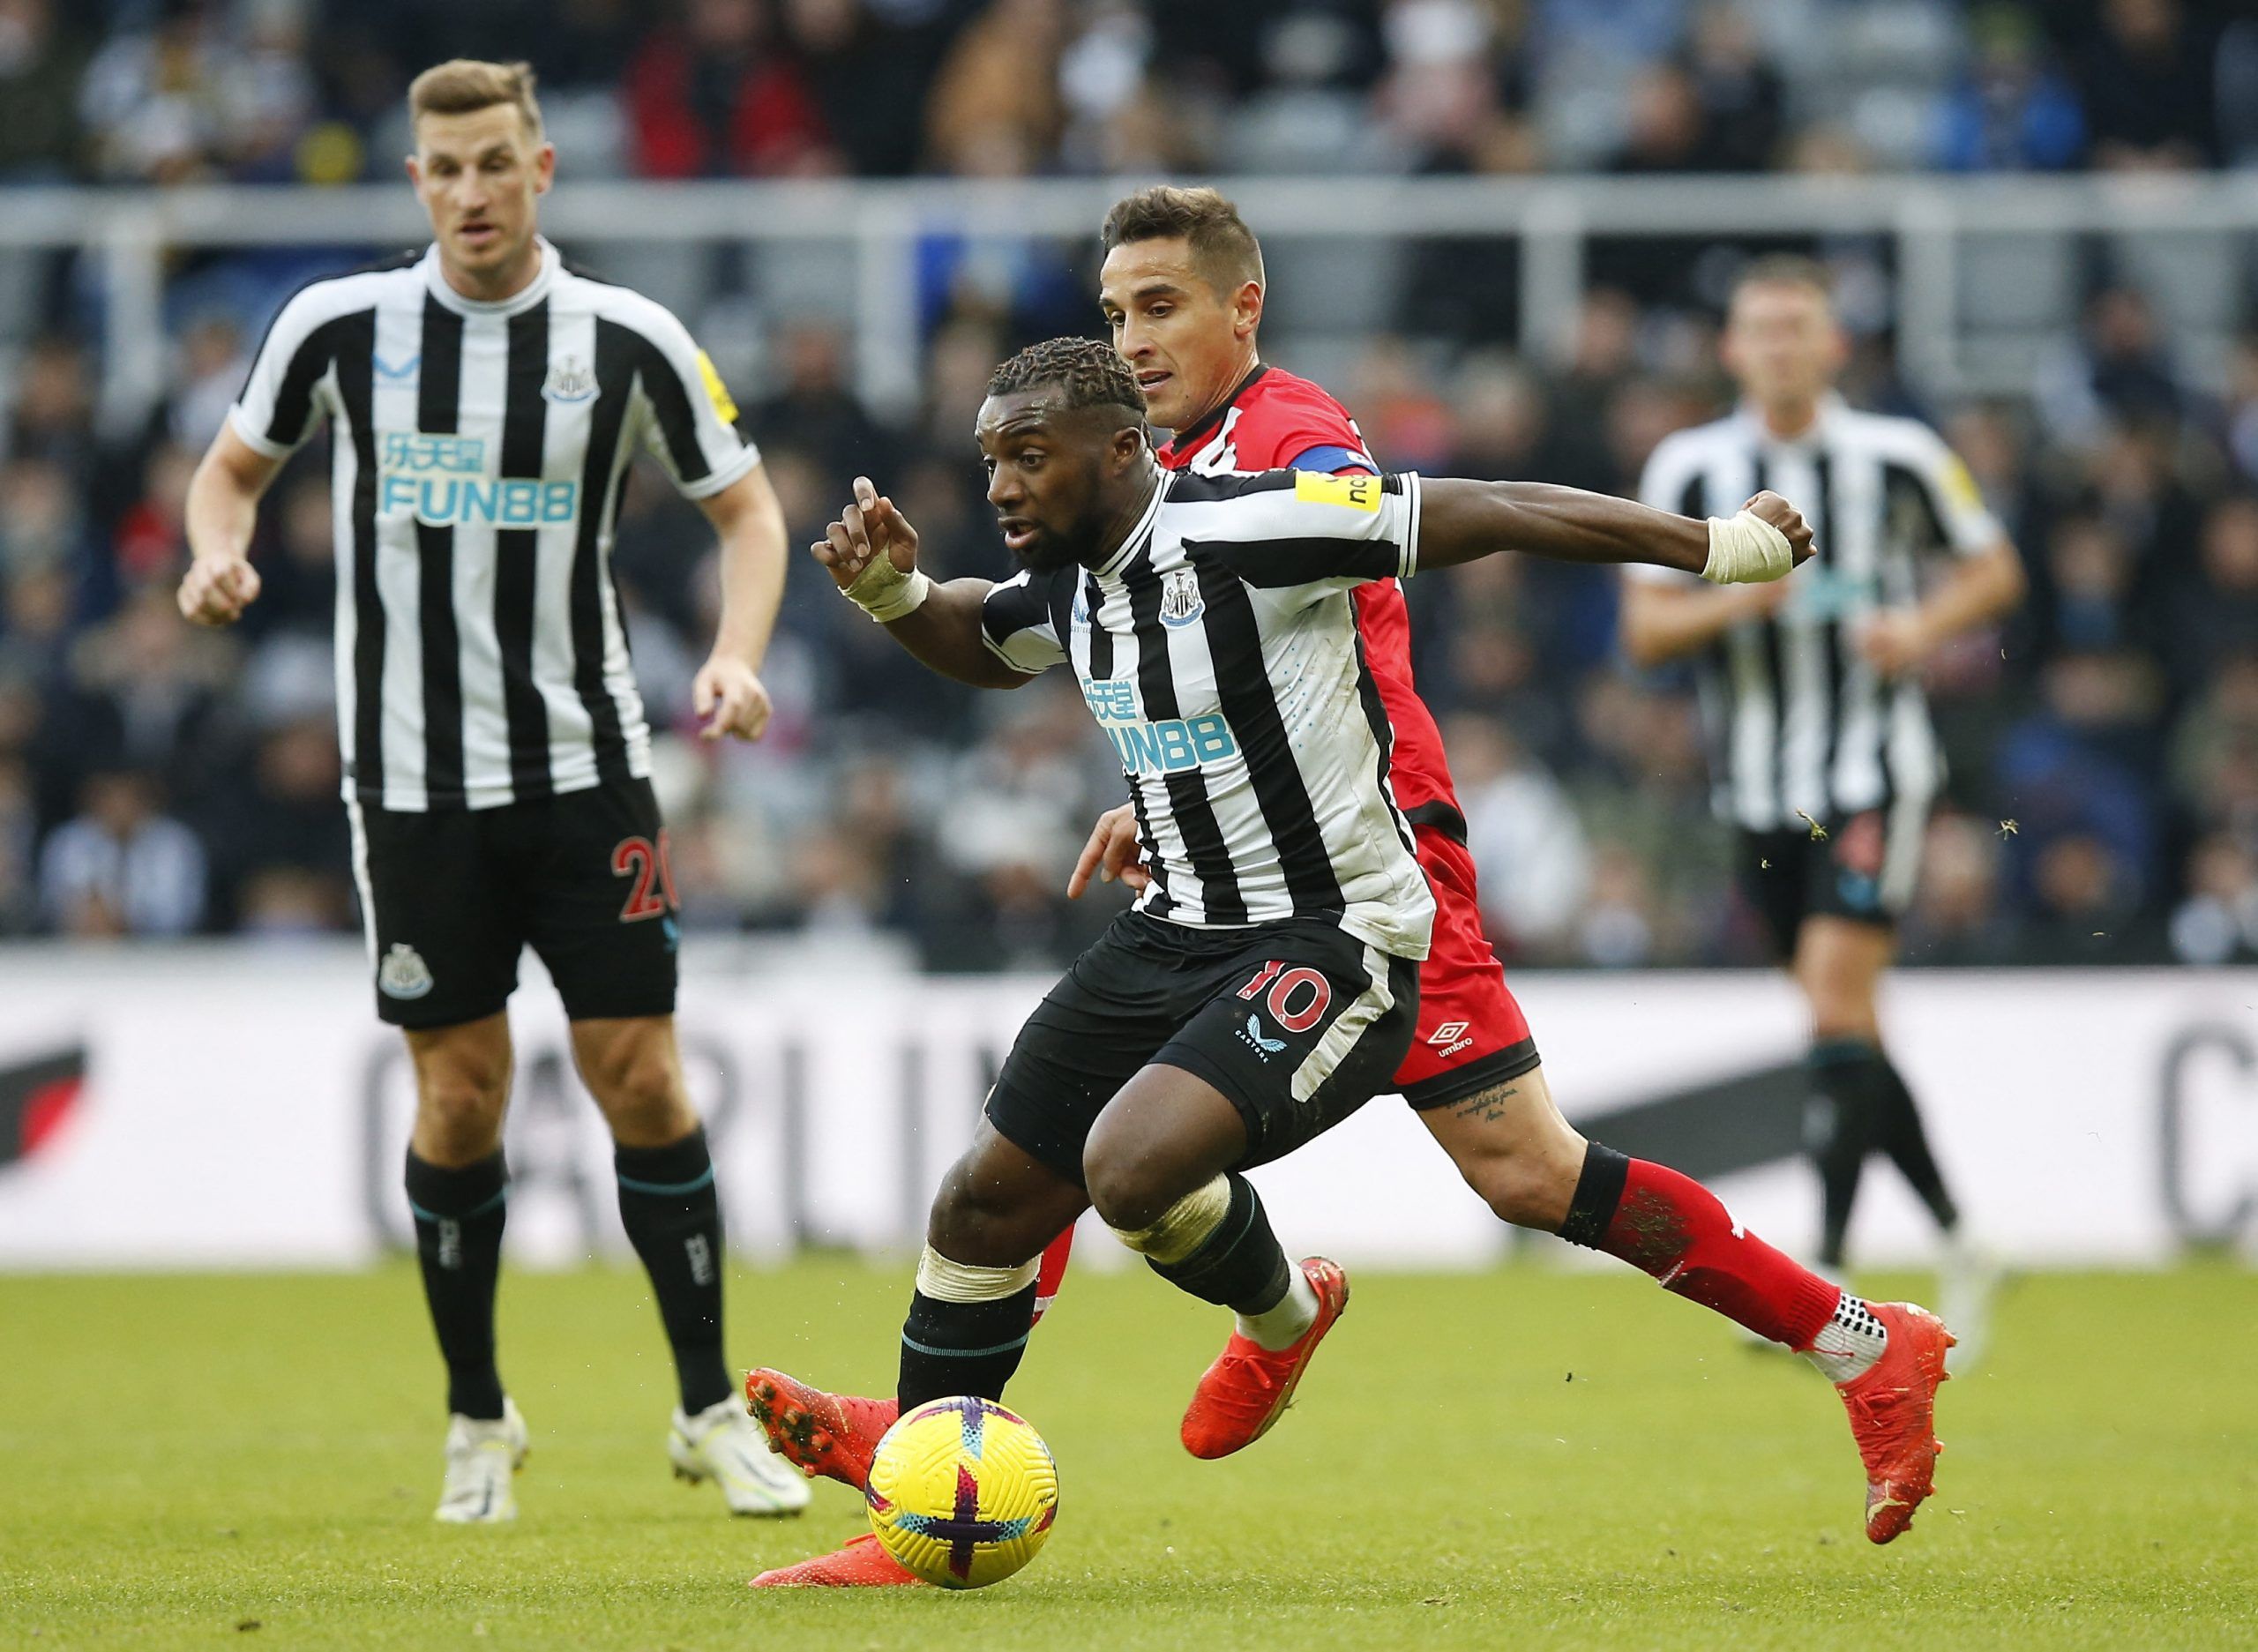 Soccer Football - Friendly - Newcastle United v Rayo Vallecano - St James' Park, Newcastle, Britain - December 17, 2022 Newcastle United's Allan Saint-Maximin in action with Rayo Vallecano's Oscar Trejo Action Images via Reuters/Craig Brough